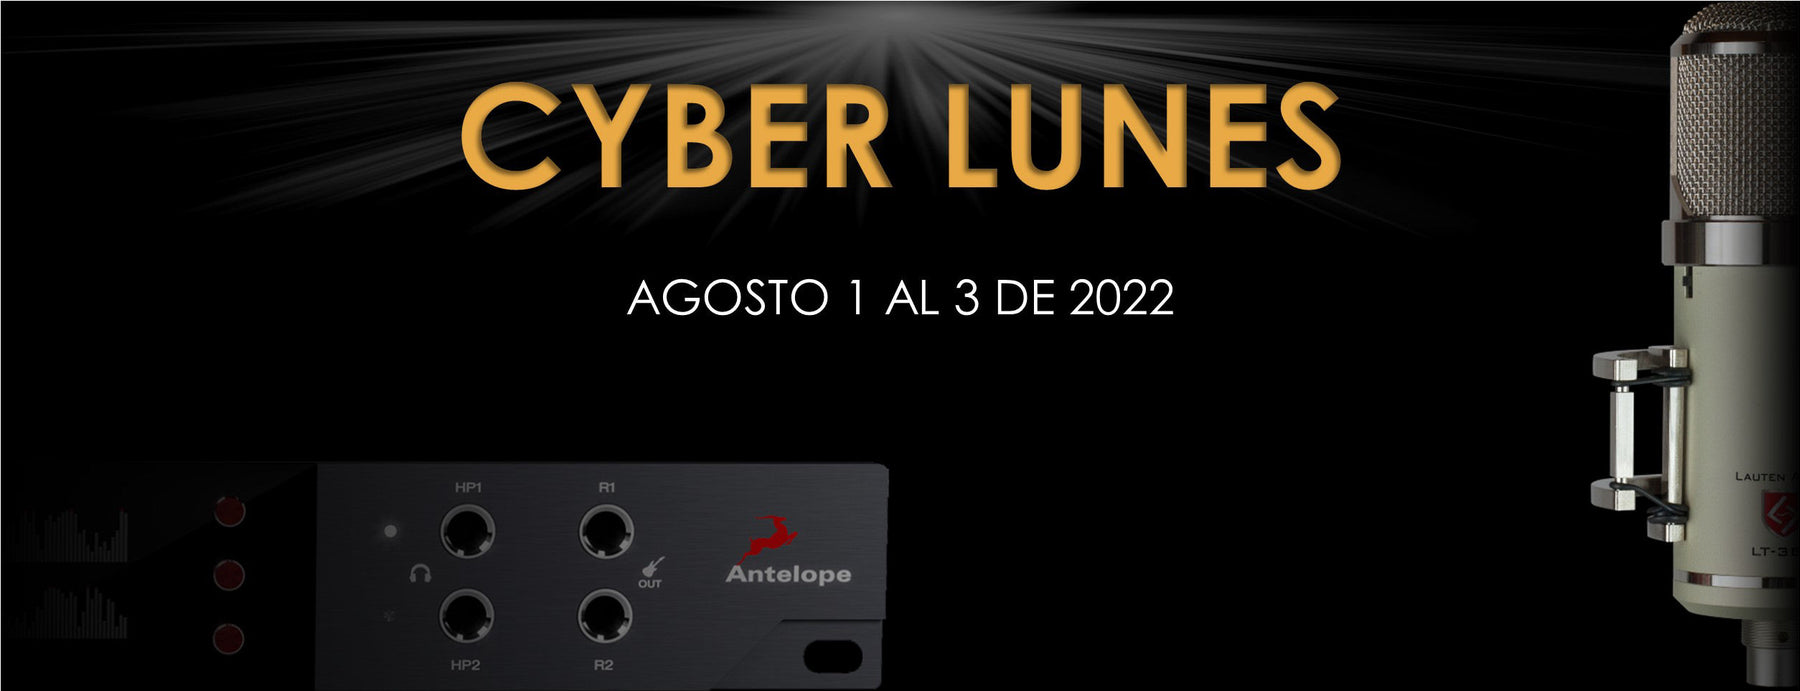 Cyber Lunes 2022